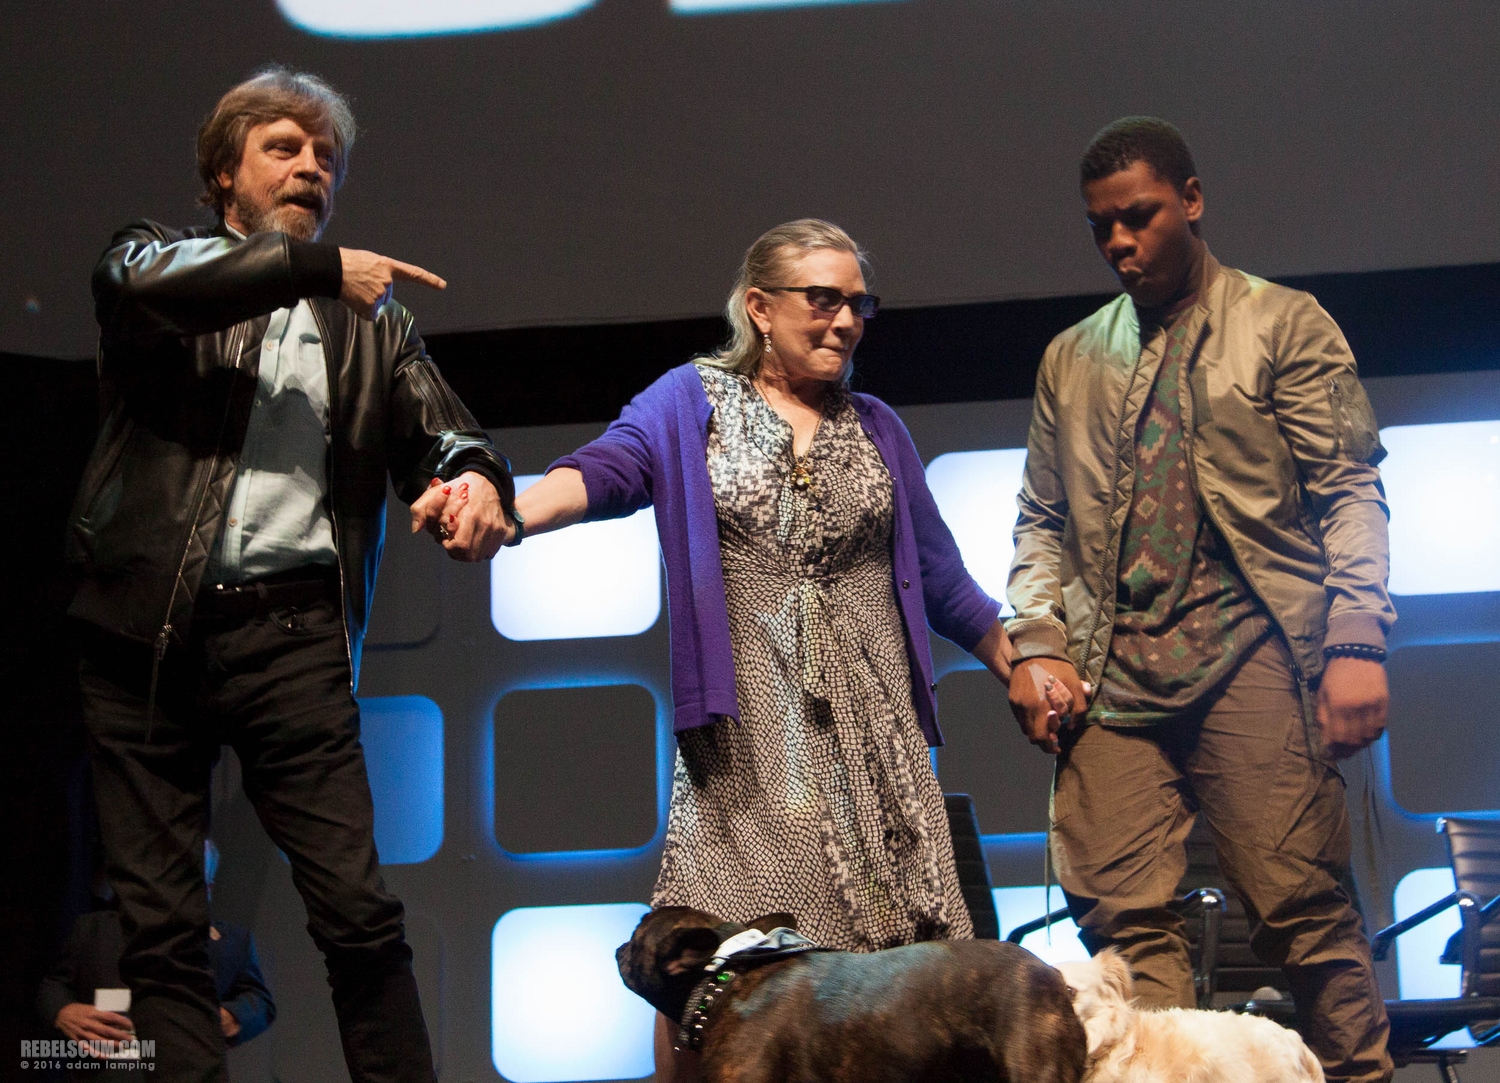 star-wars-celebration-2016-future-filmmakers-and-closing-ceremony-046.jpg